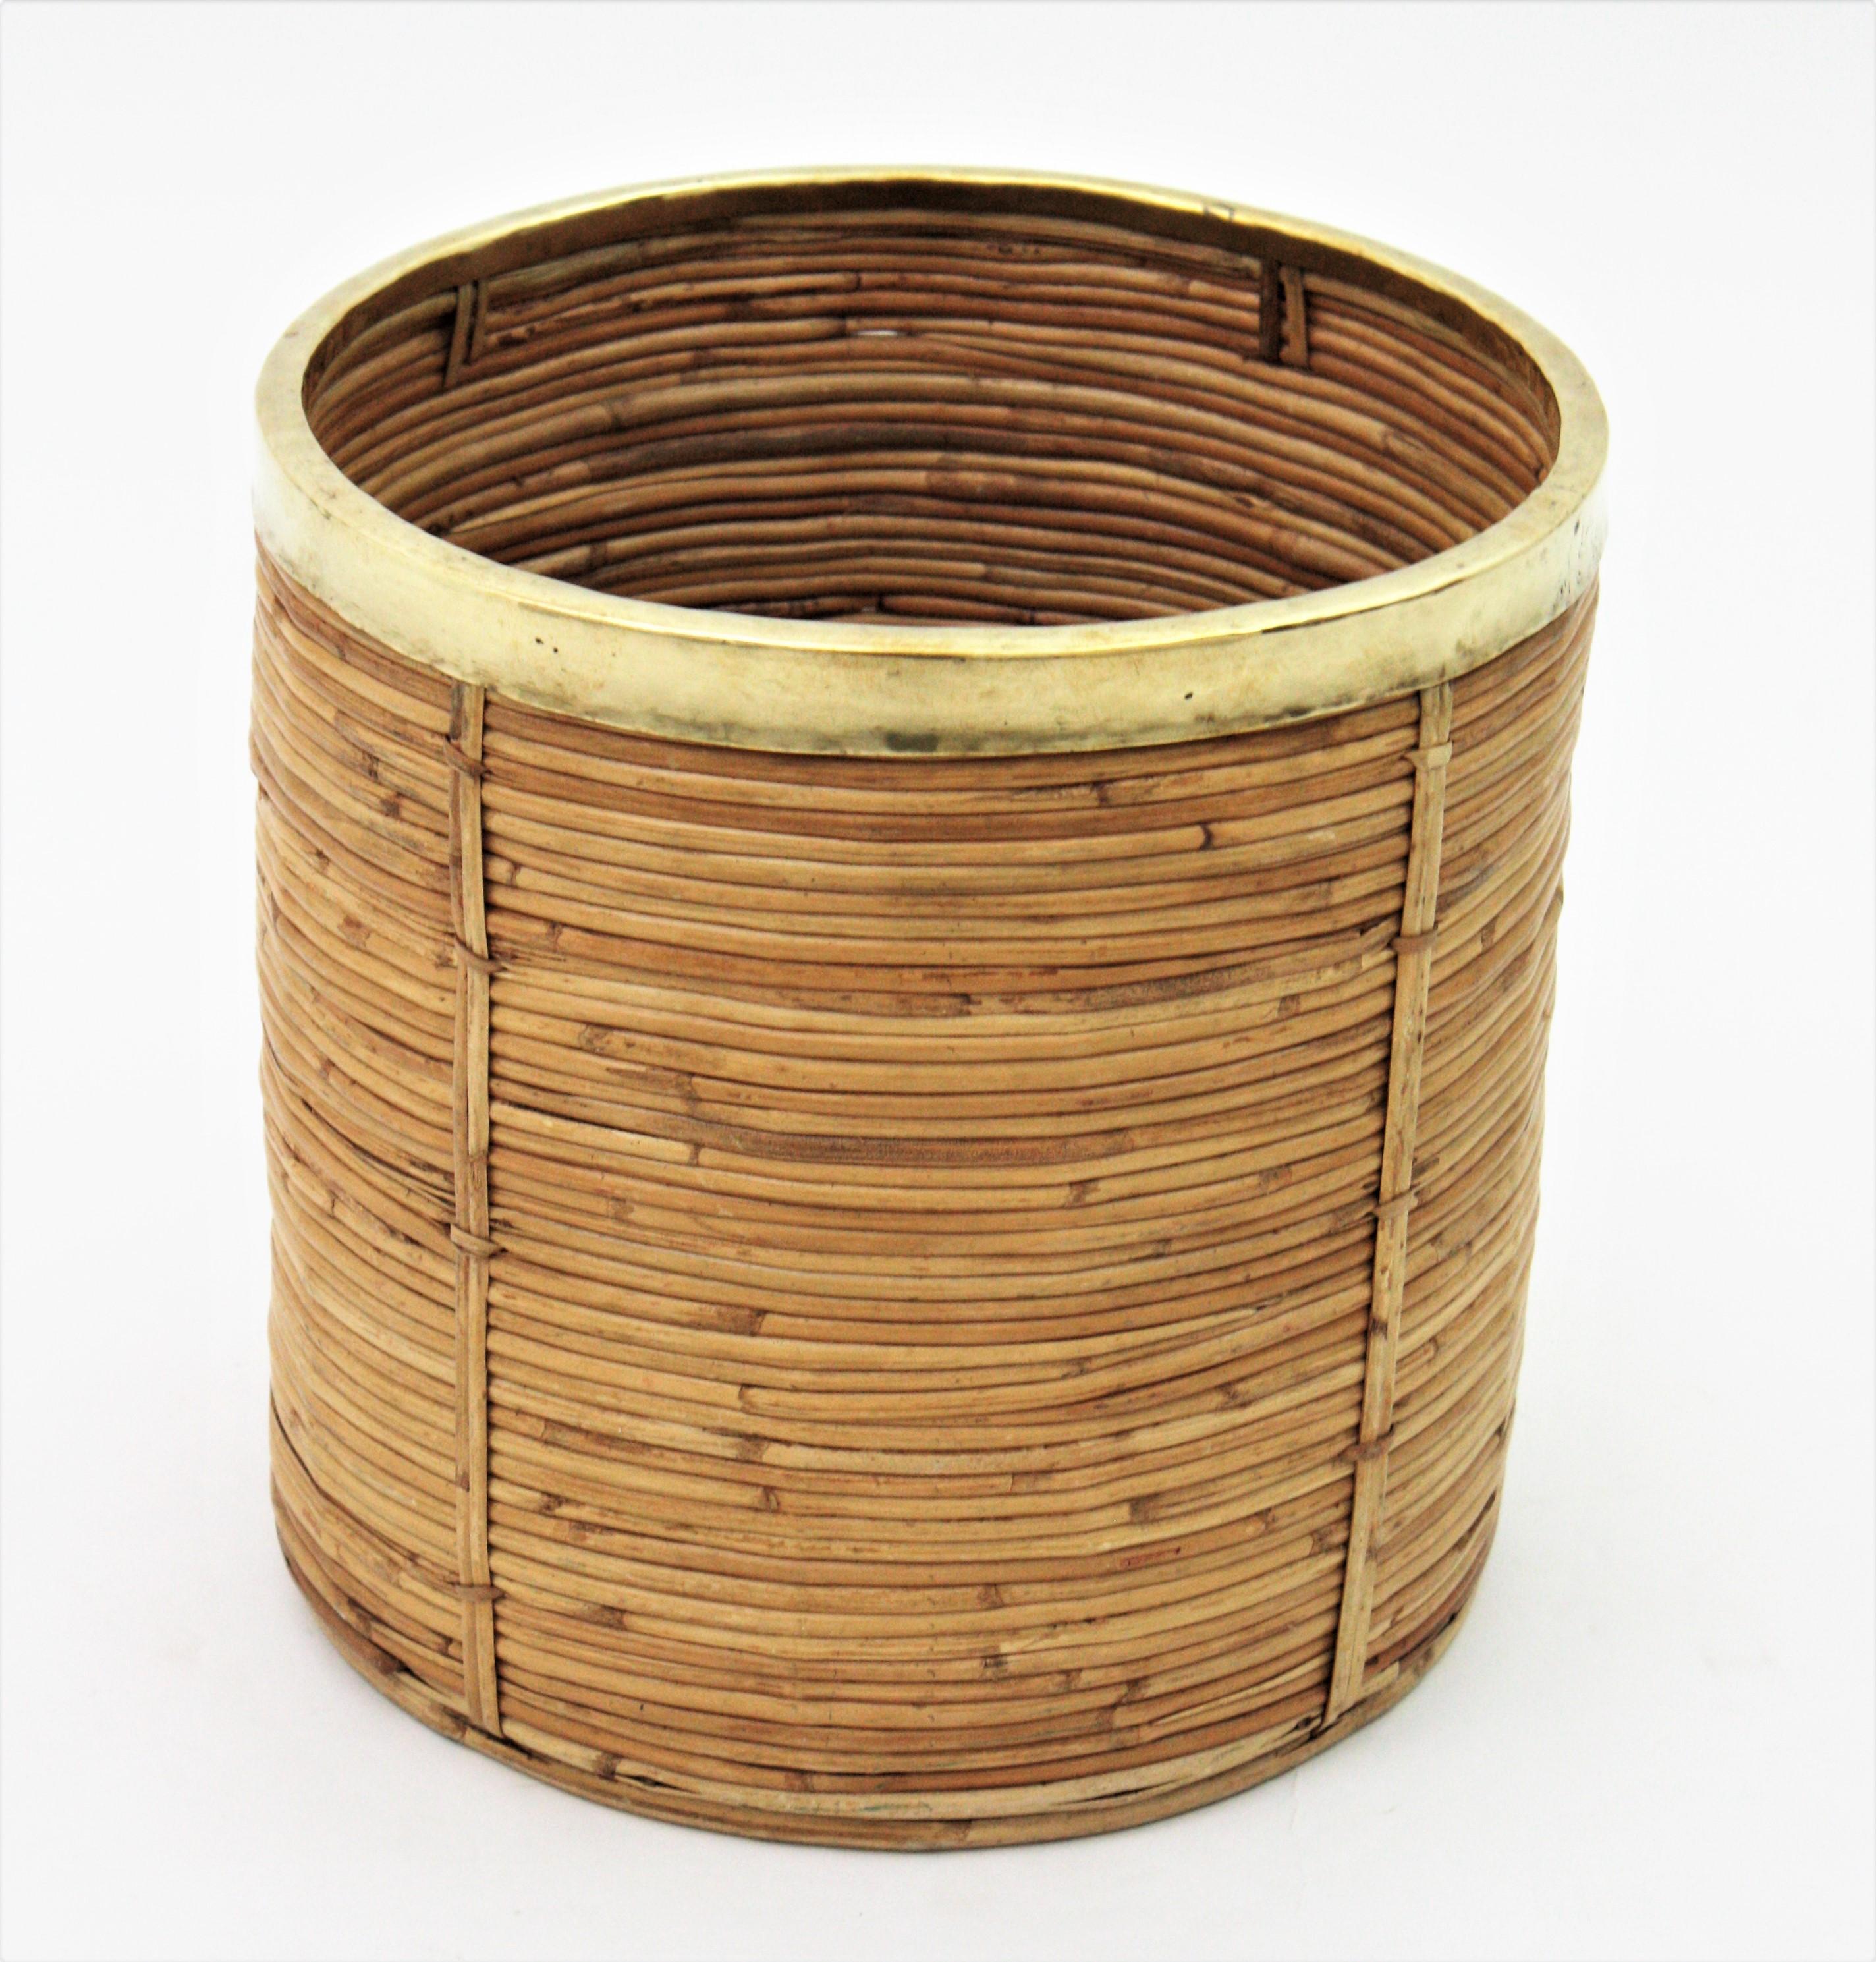 Mid-Century Modern decorative brass and bamboo or rattan planter or basket. Handcrafted in Italy, 1970s.
Round shape with gilded brass rim. Inspired on Gabriella Crespi designs.
It can be used as planter, storage basket or paper bin.
Plants not